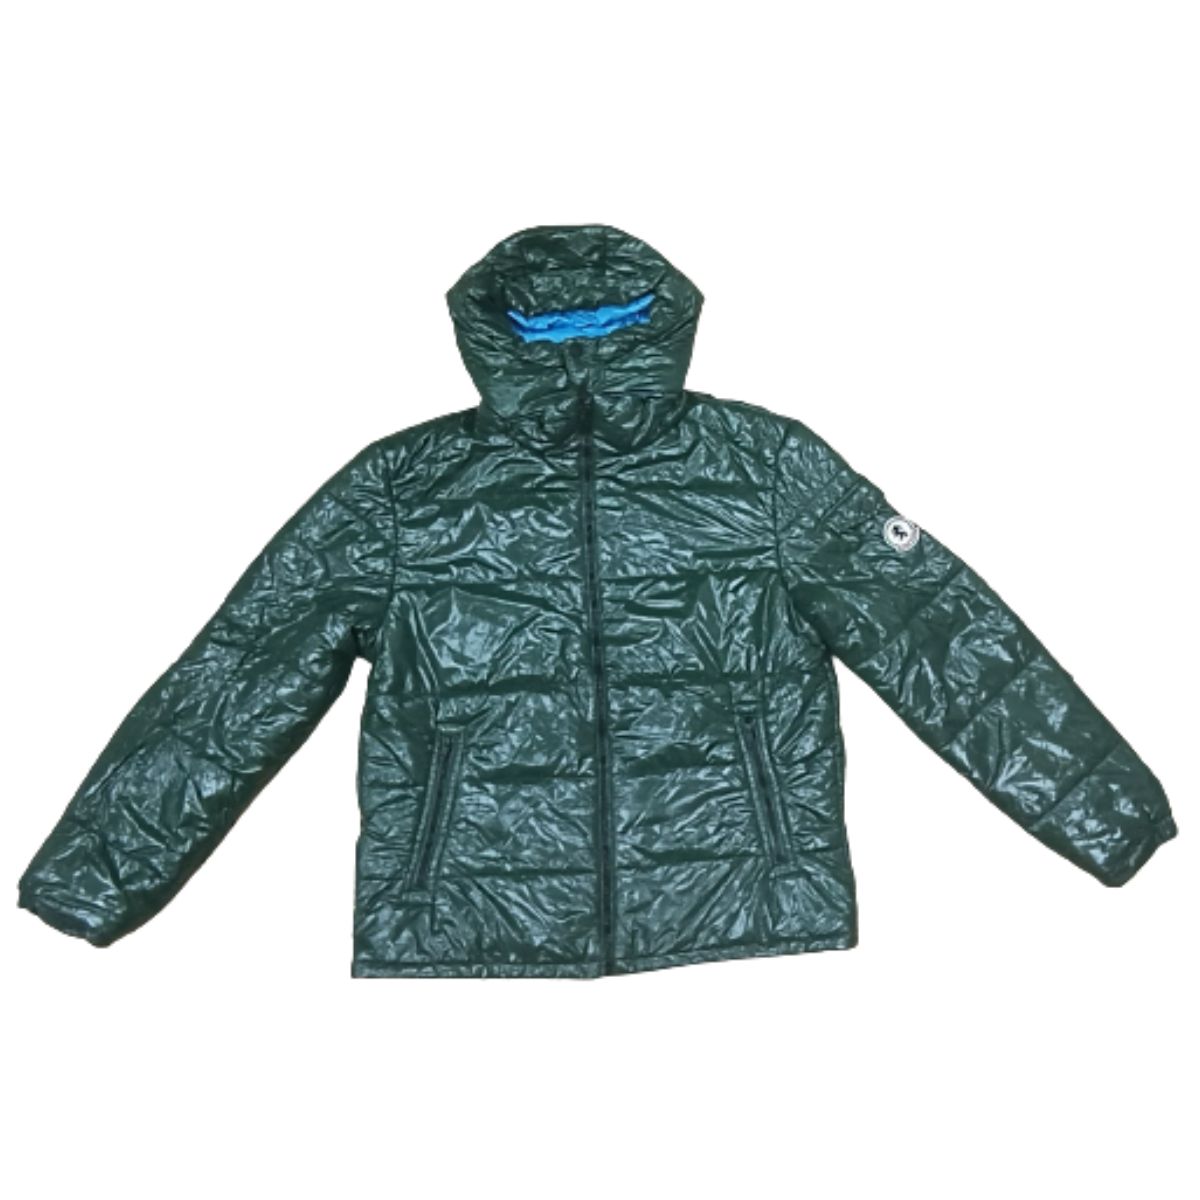 Red Tape Jacket for Man - Pea Green